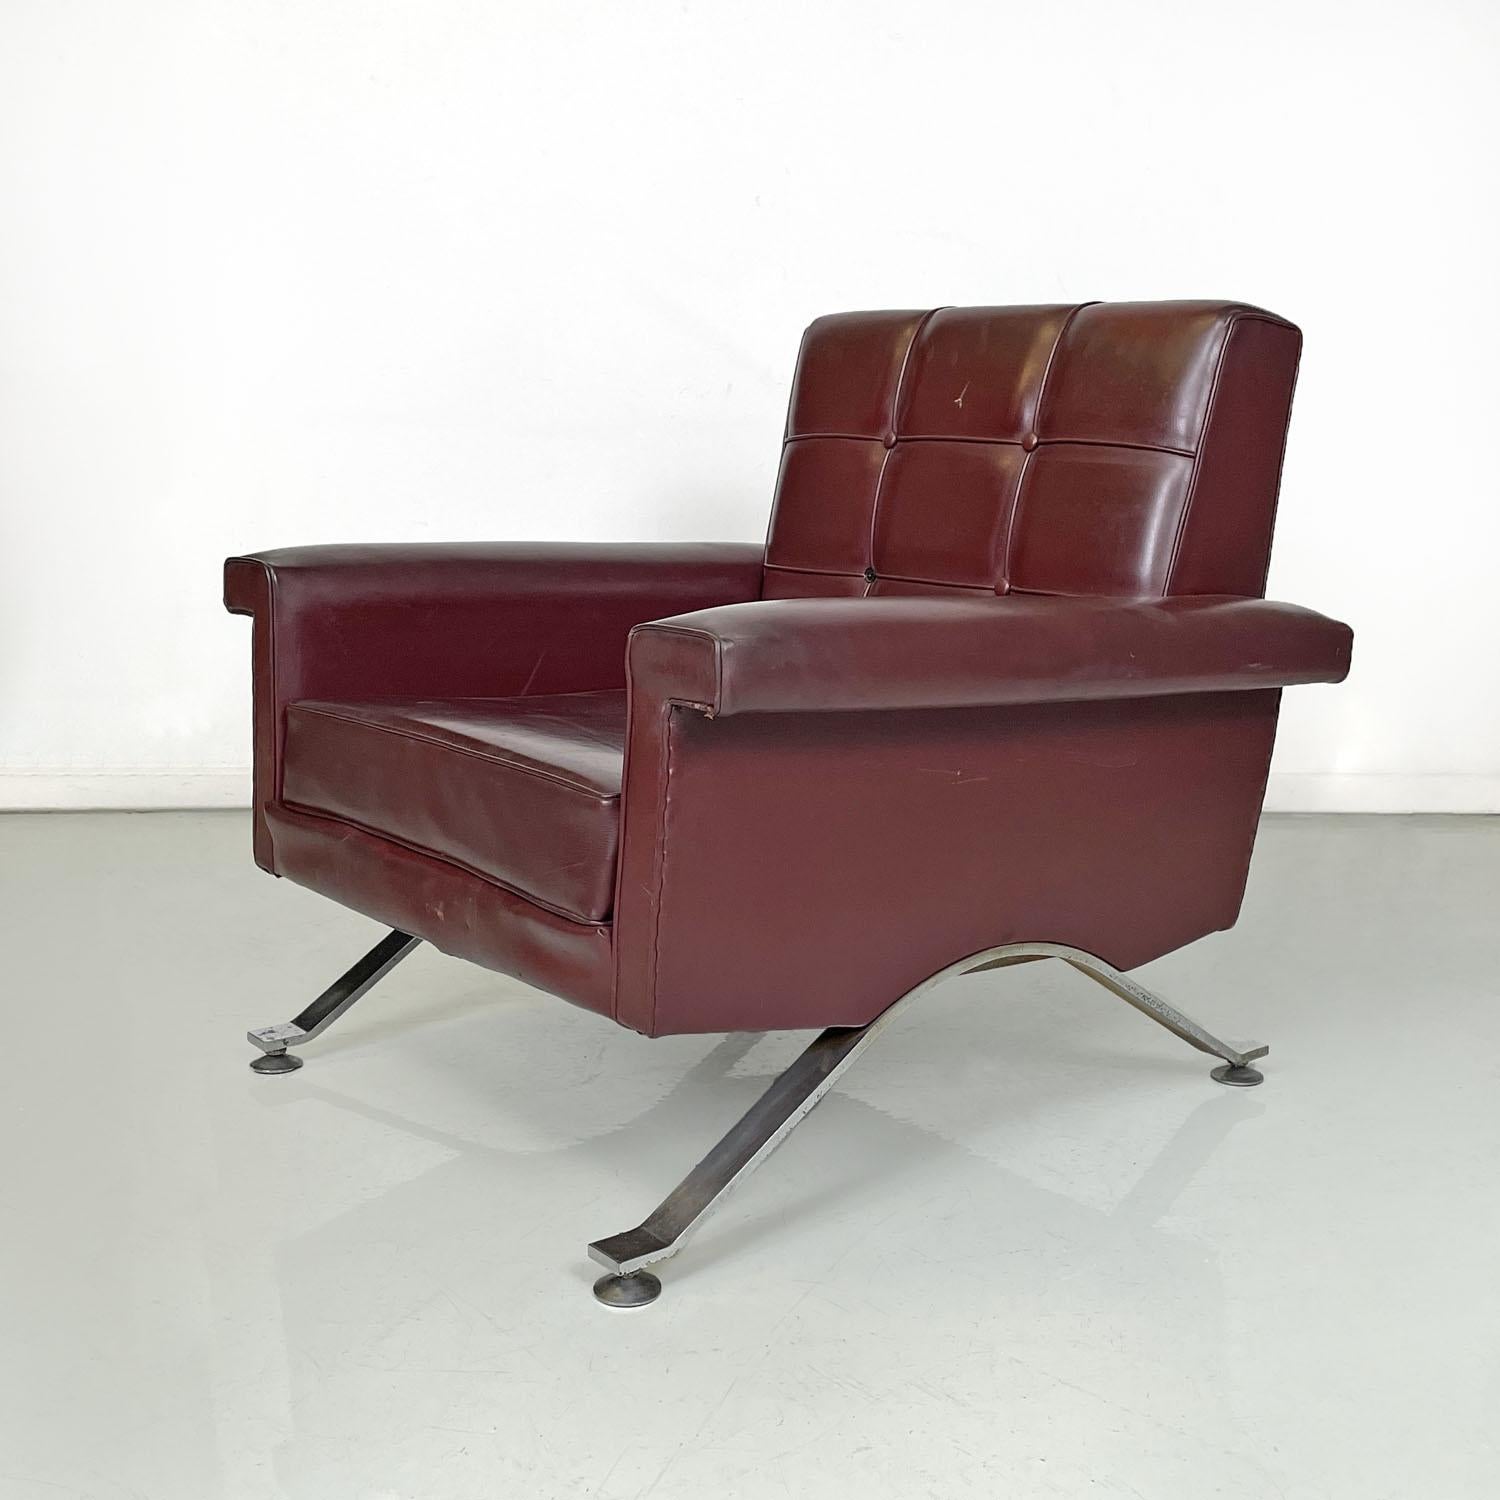 Mid-Century Modern Italian mid-century modern leather armchairs by Ico Parisi for Cassina, 1960s For Sale